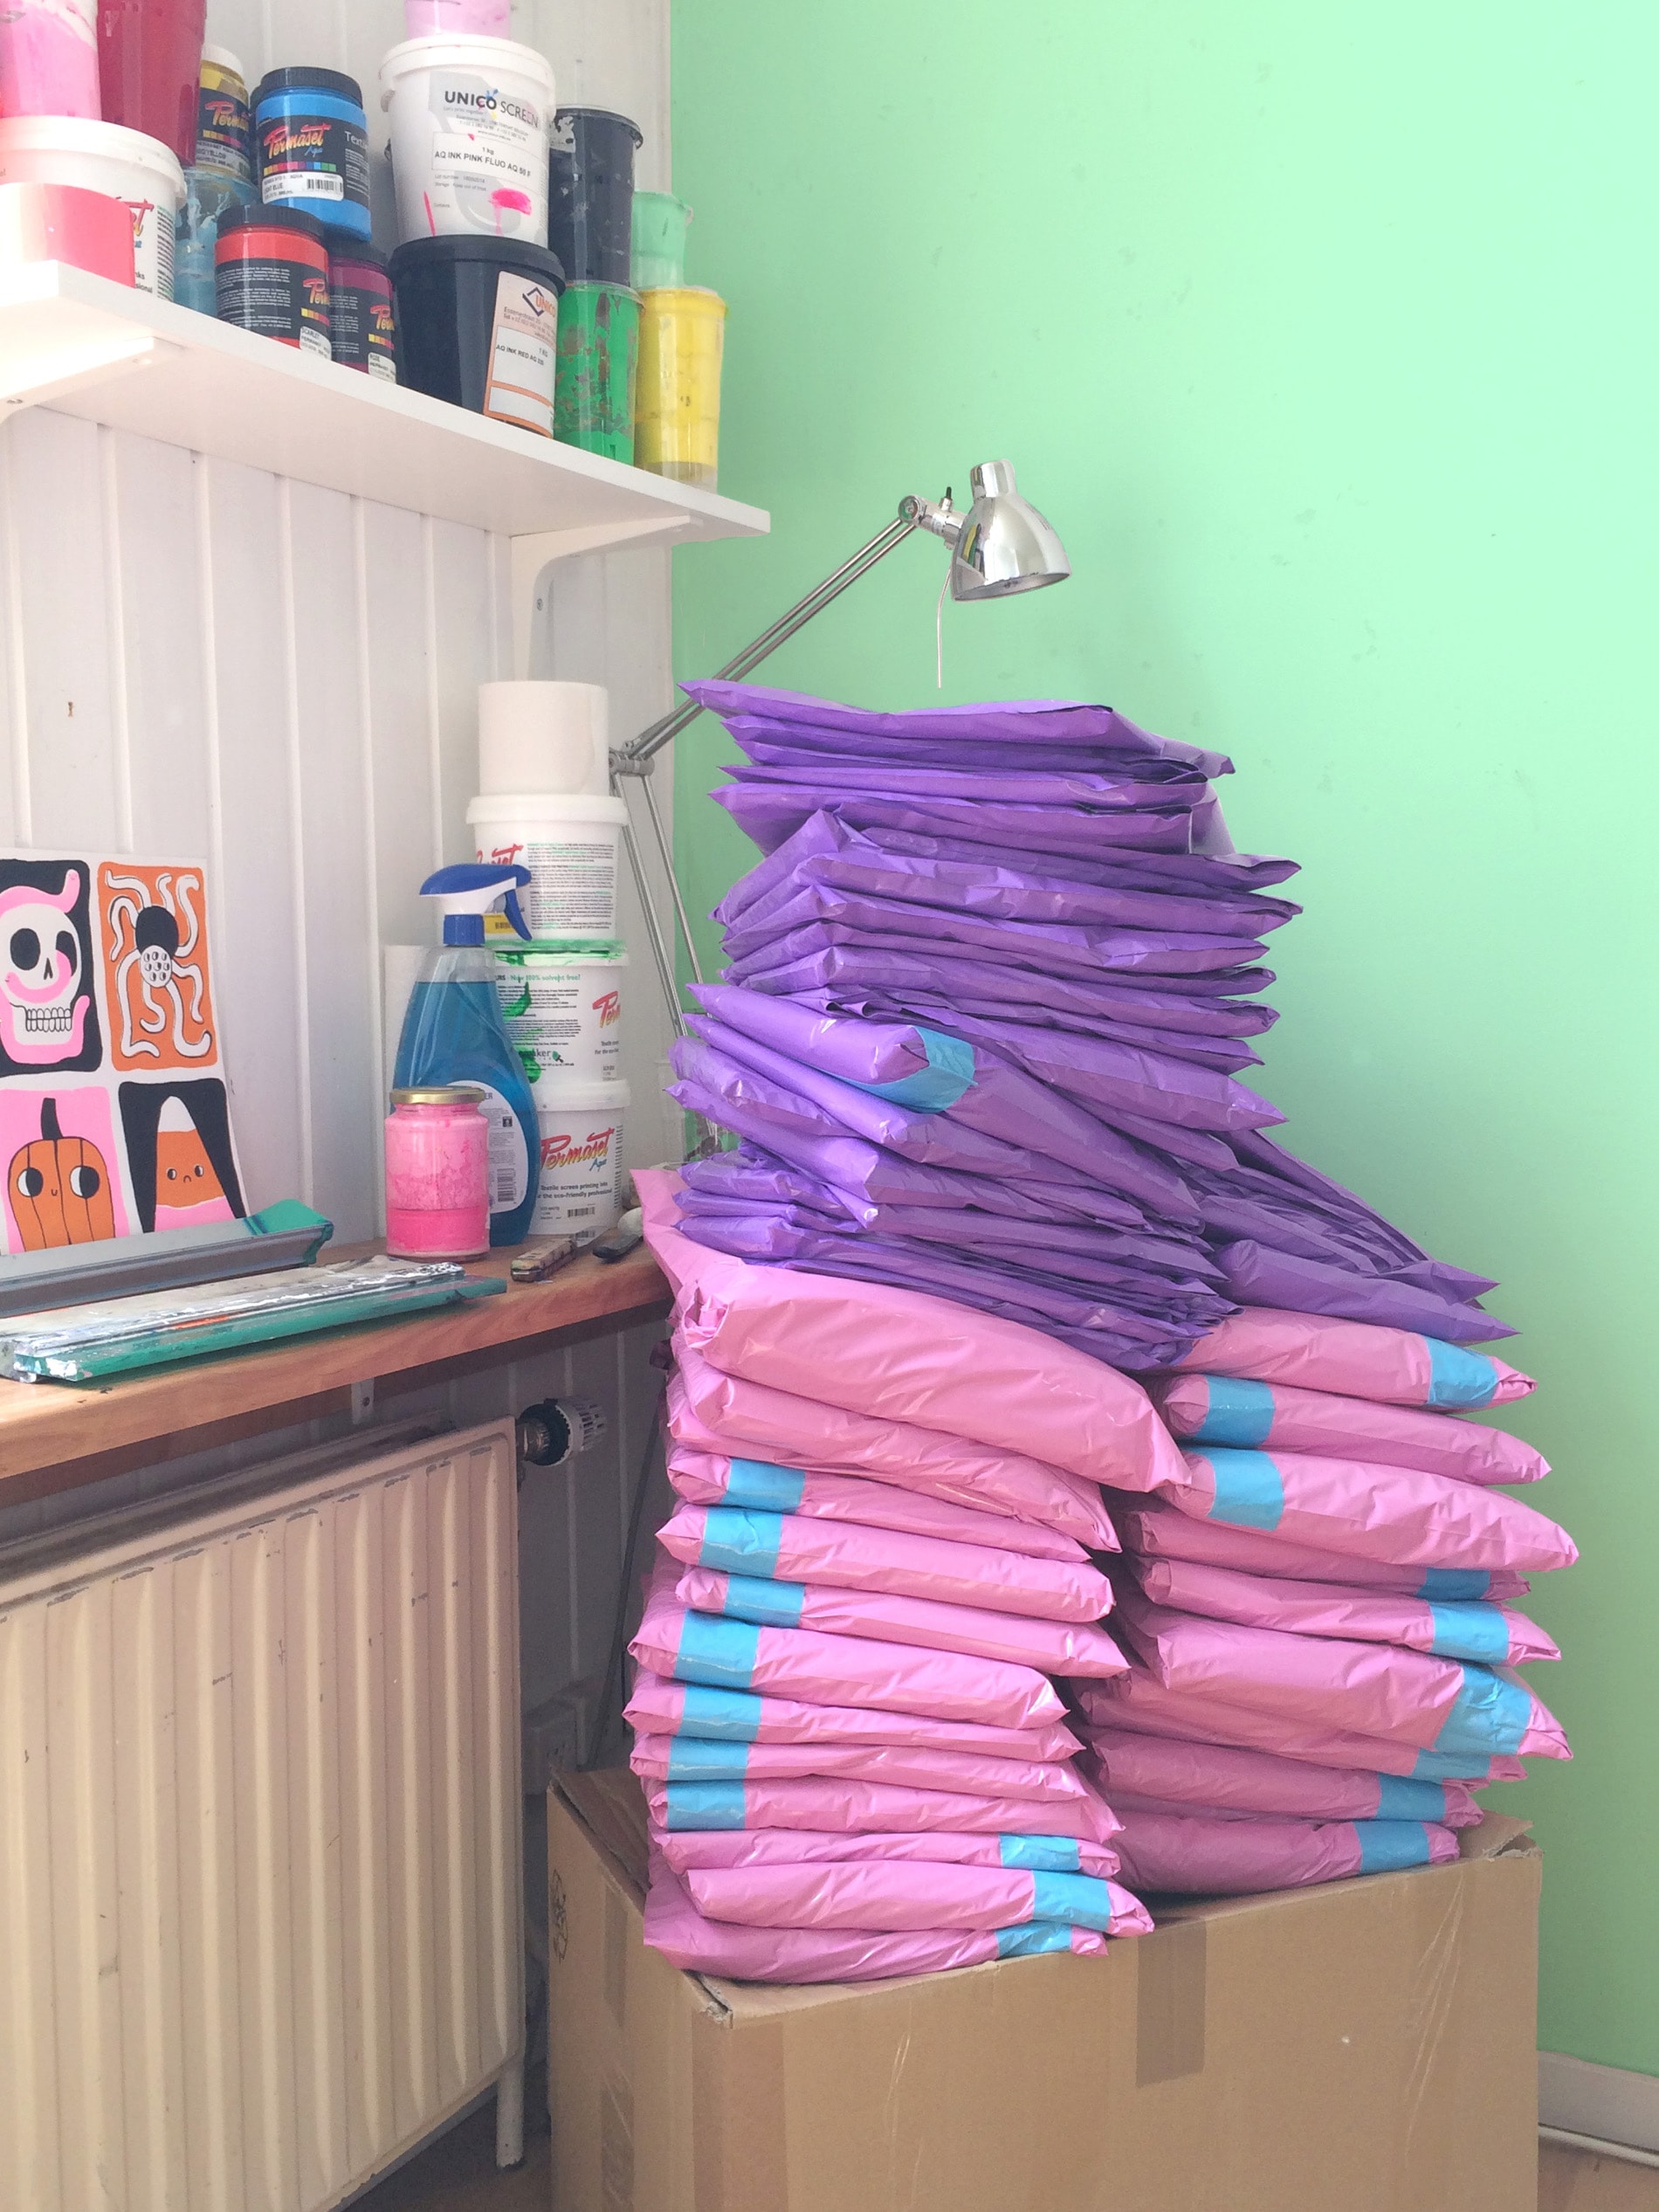 Pile of pink and purple mailer bags on desk